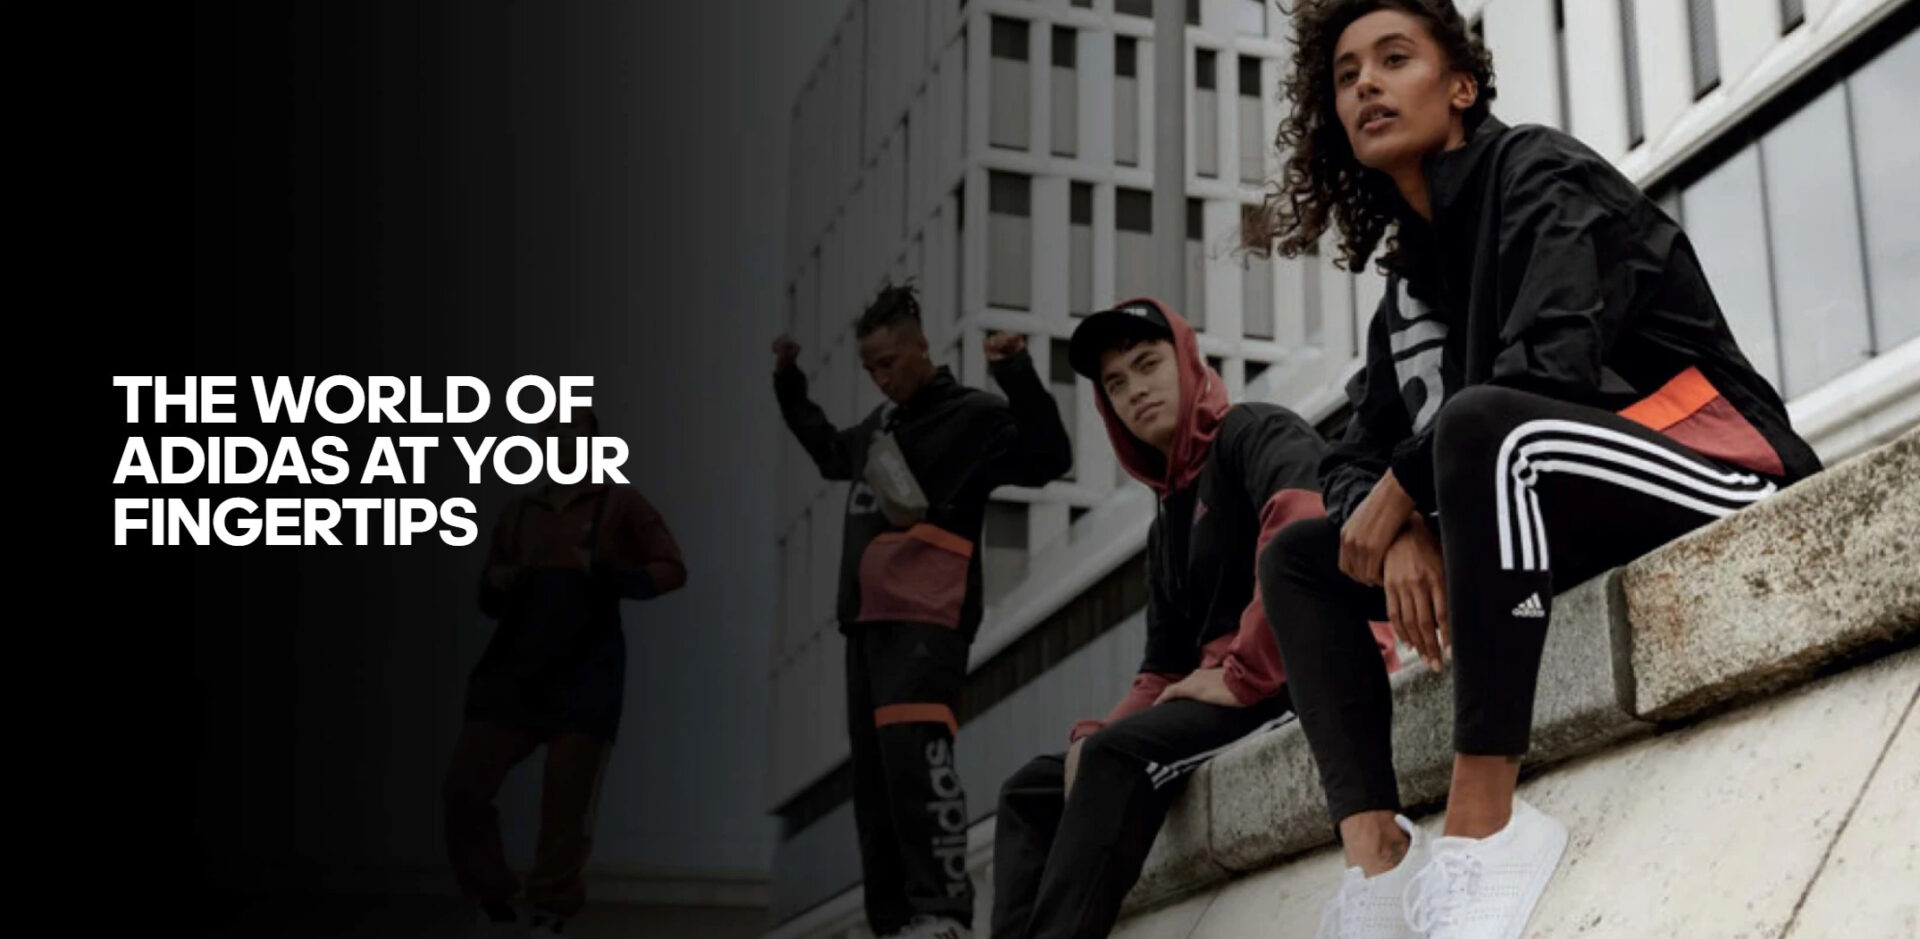 Adidas has been concentrating on their 2020 strategy's catchphrase, "Creating the New."